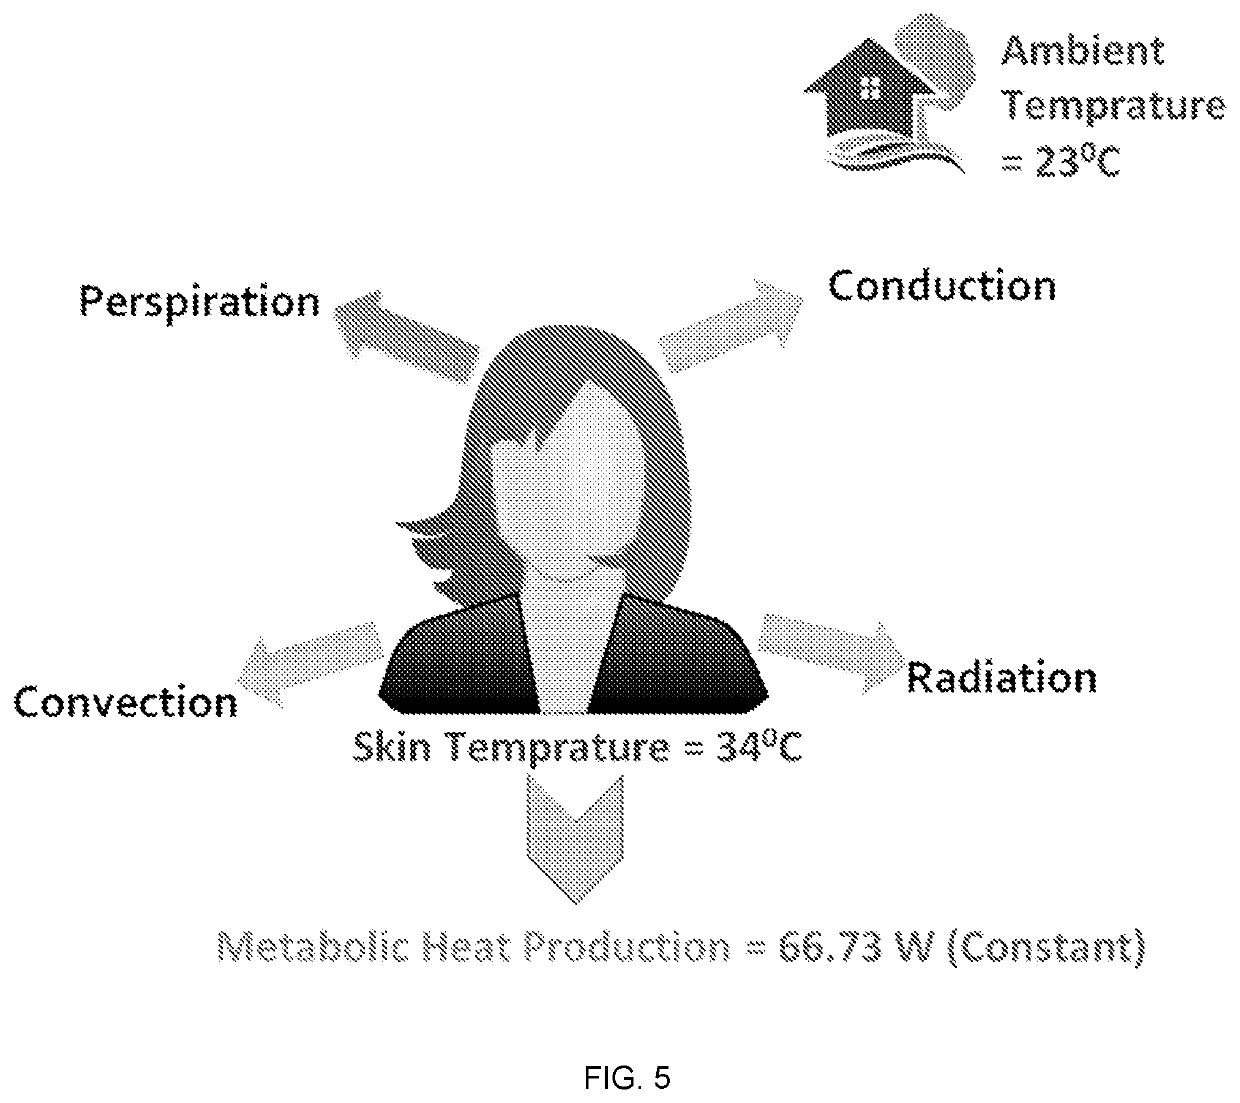 Garment for reducing hot flushes or relieving associated symptoms